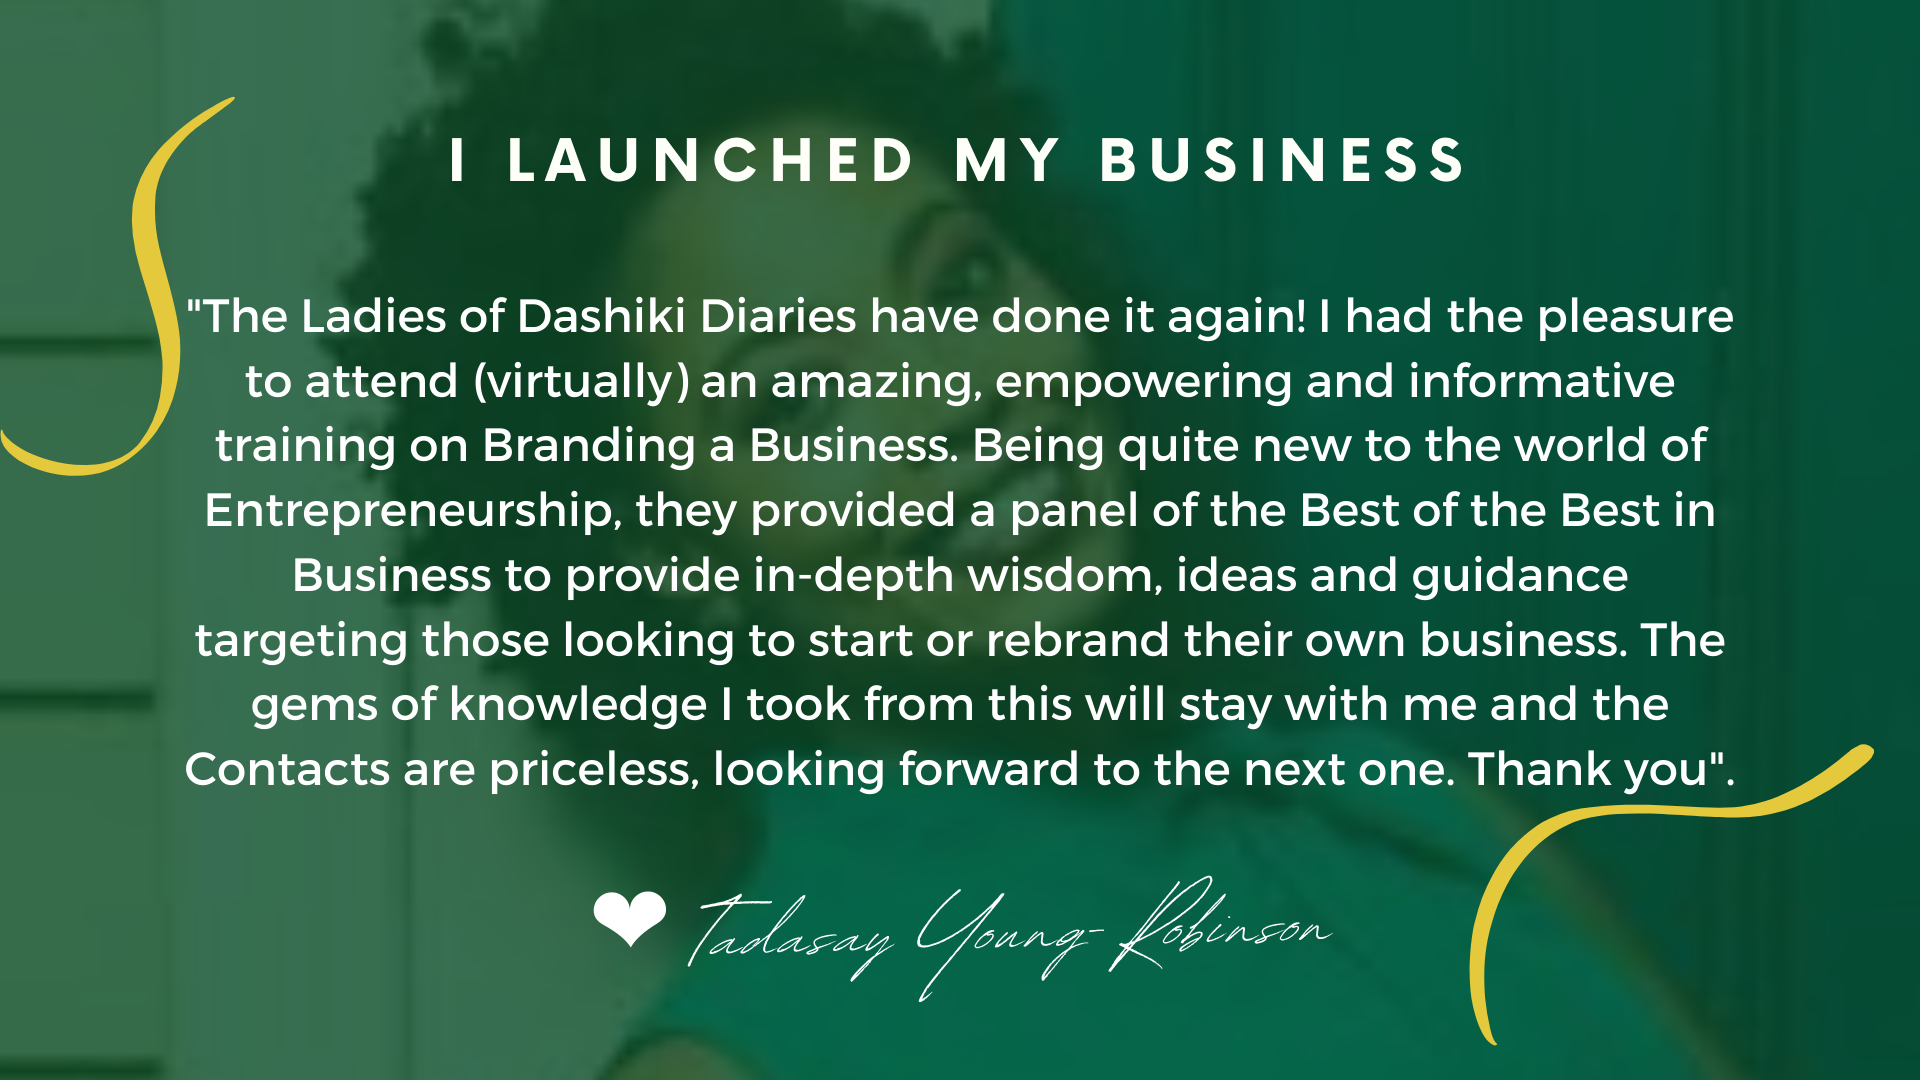 Business trainings to help you launch your business